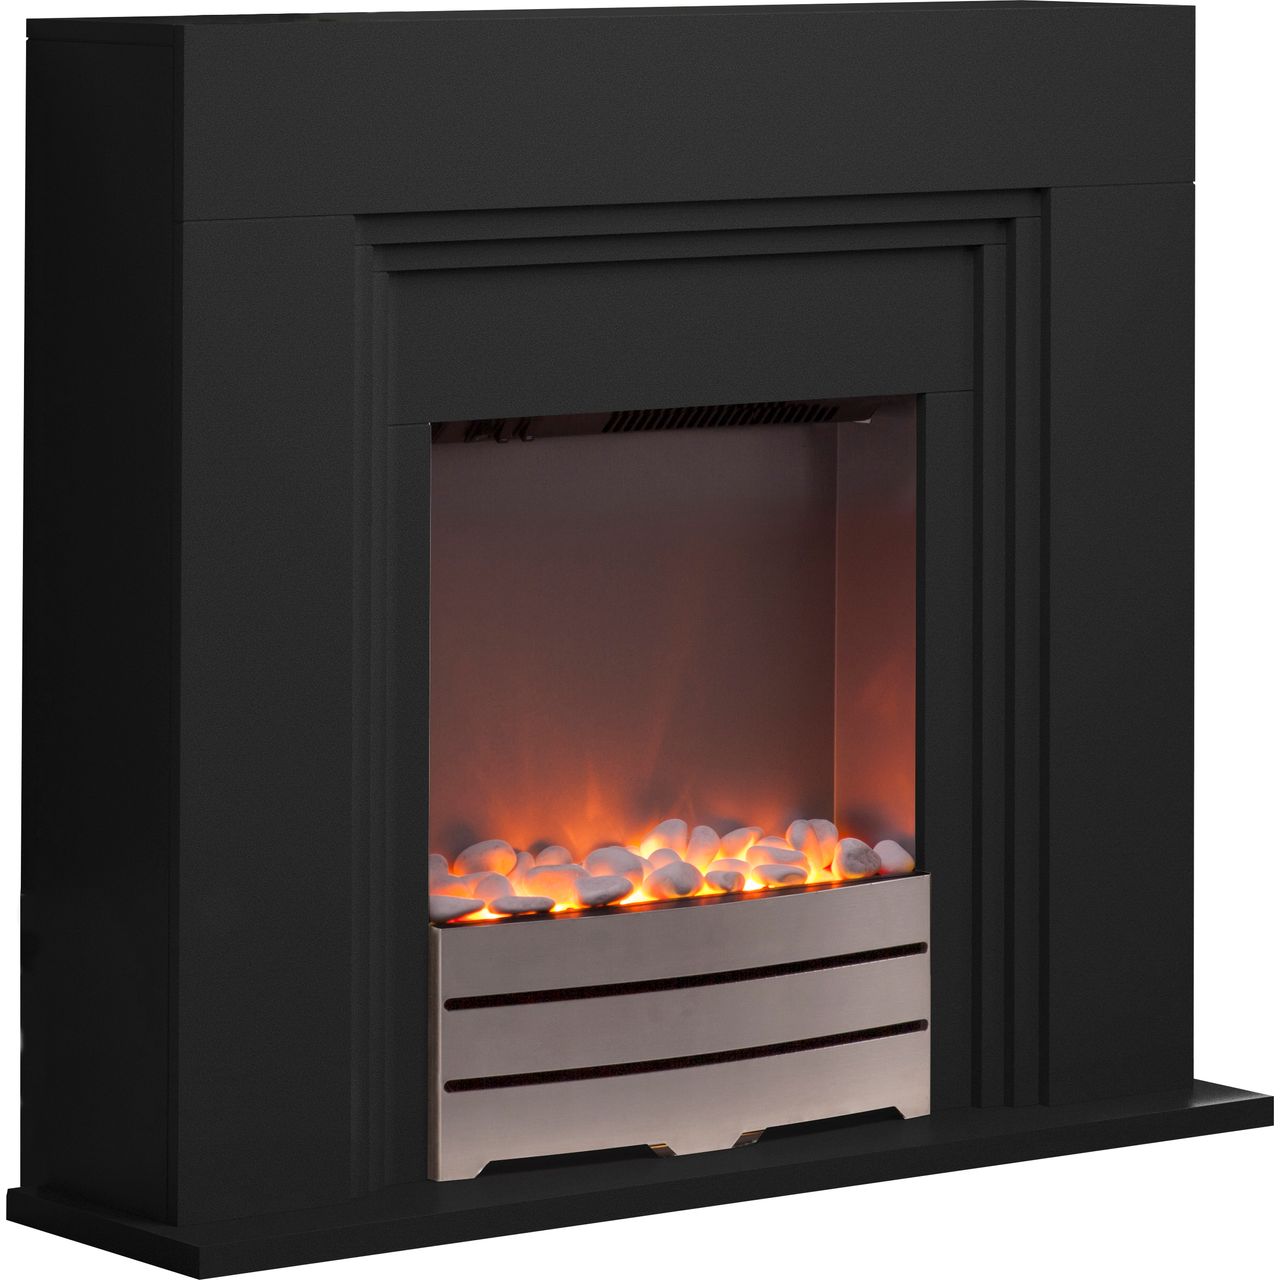 Warmlite WL45013 Pebble Bed Suite And Surround Fireplace Review